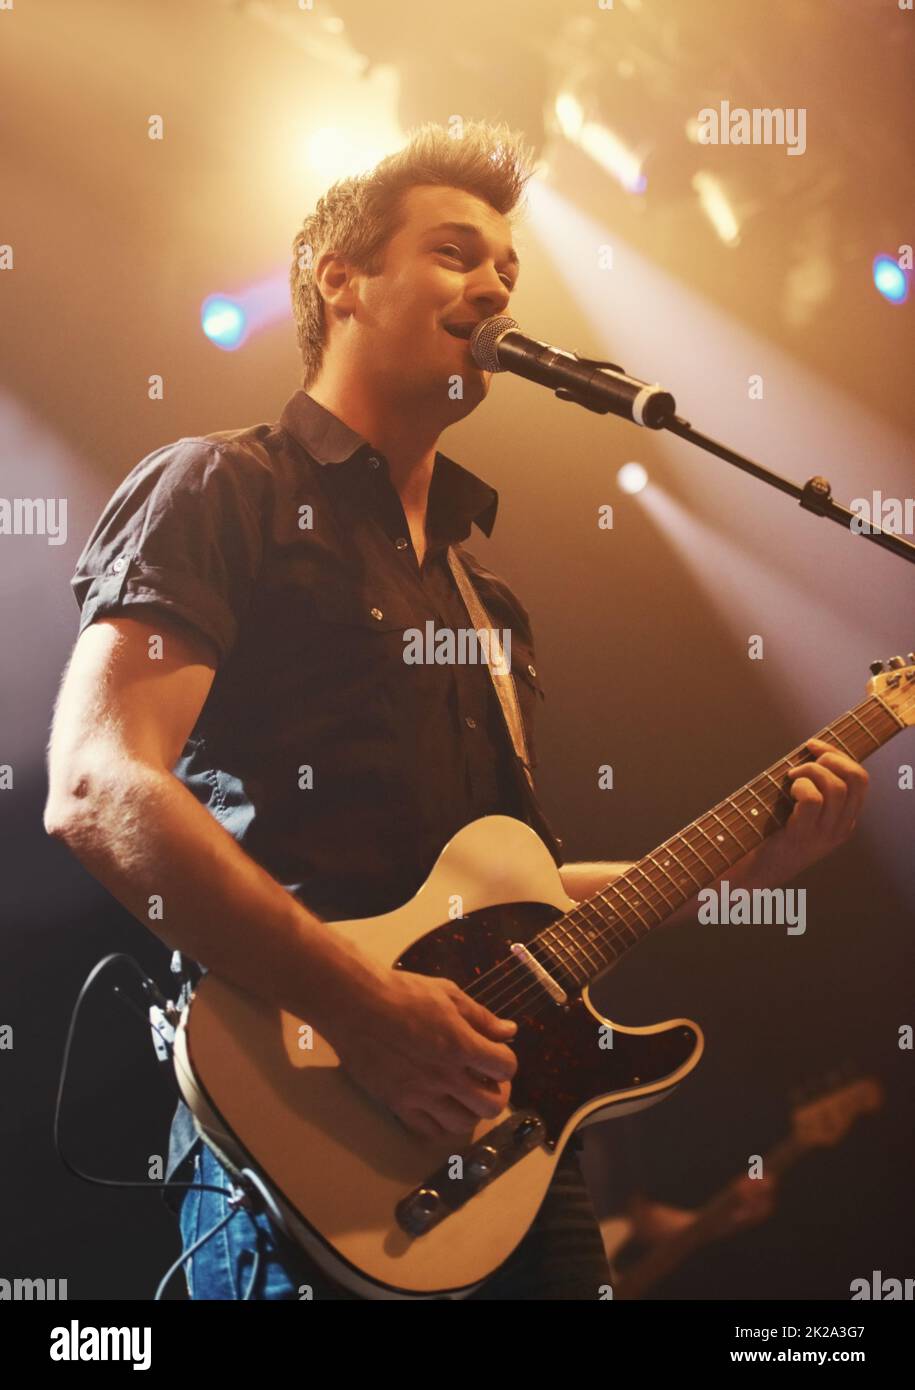 A young performer singing and playing his guitar. This concert was created for the sole purpose of this photo shoot, featuring 300 models and 3 live bands. All people in this shoot are model released. Stock Photo